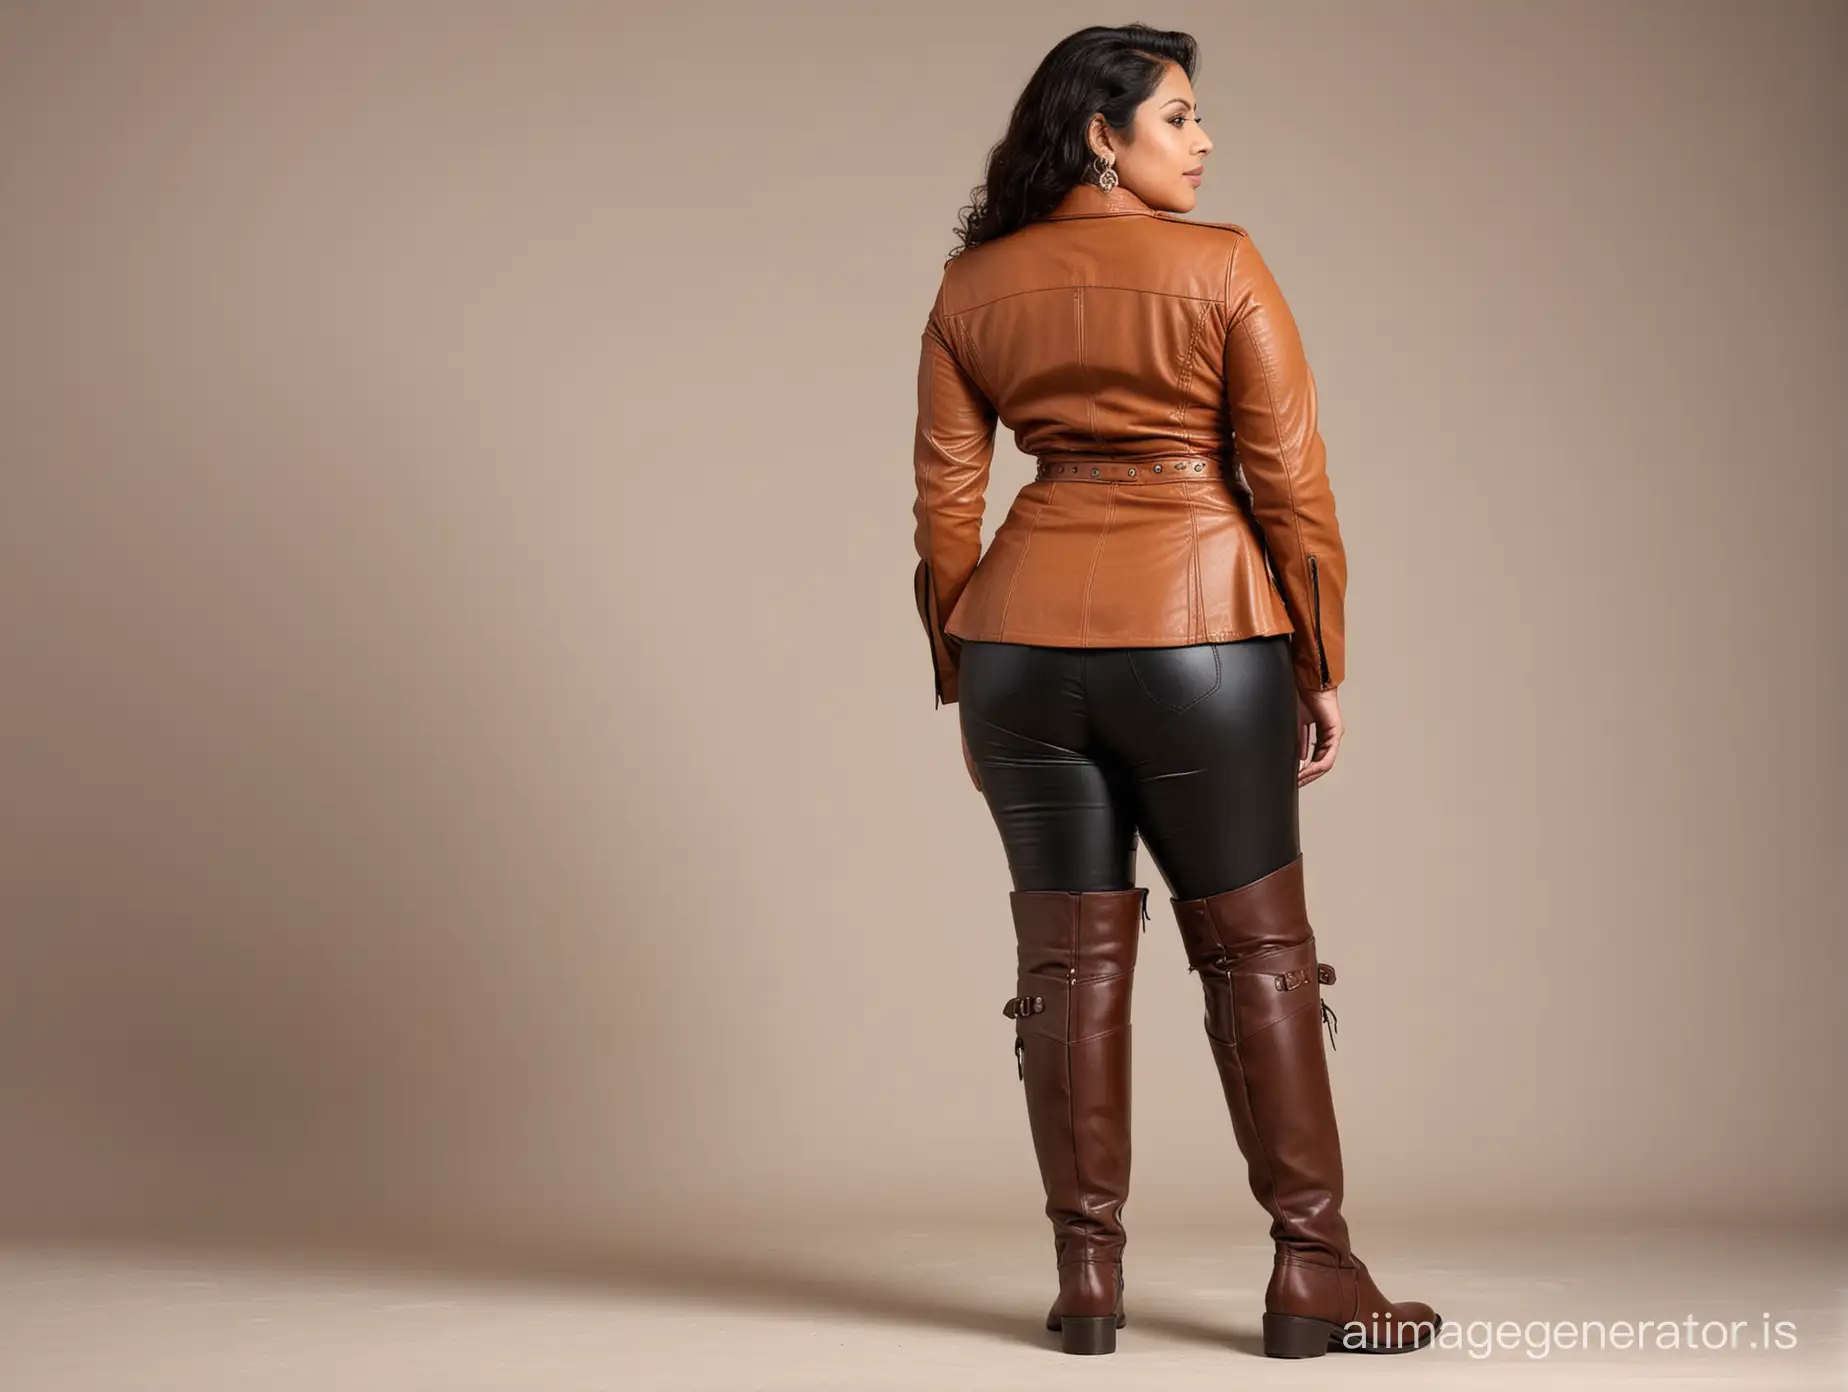 Elegant-Indian-Woman-in-Equestrian-Attire-Leather-Boots-Perspective